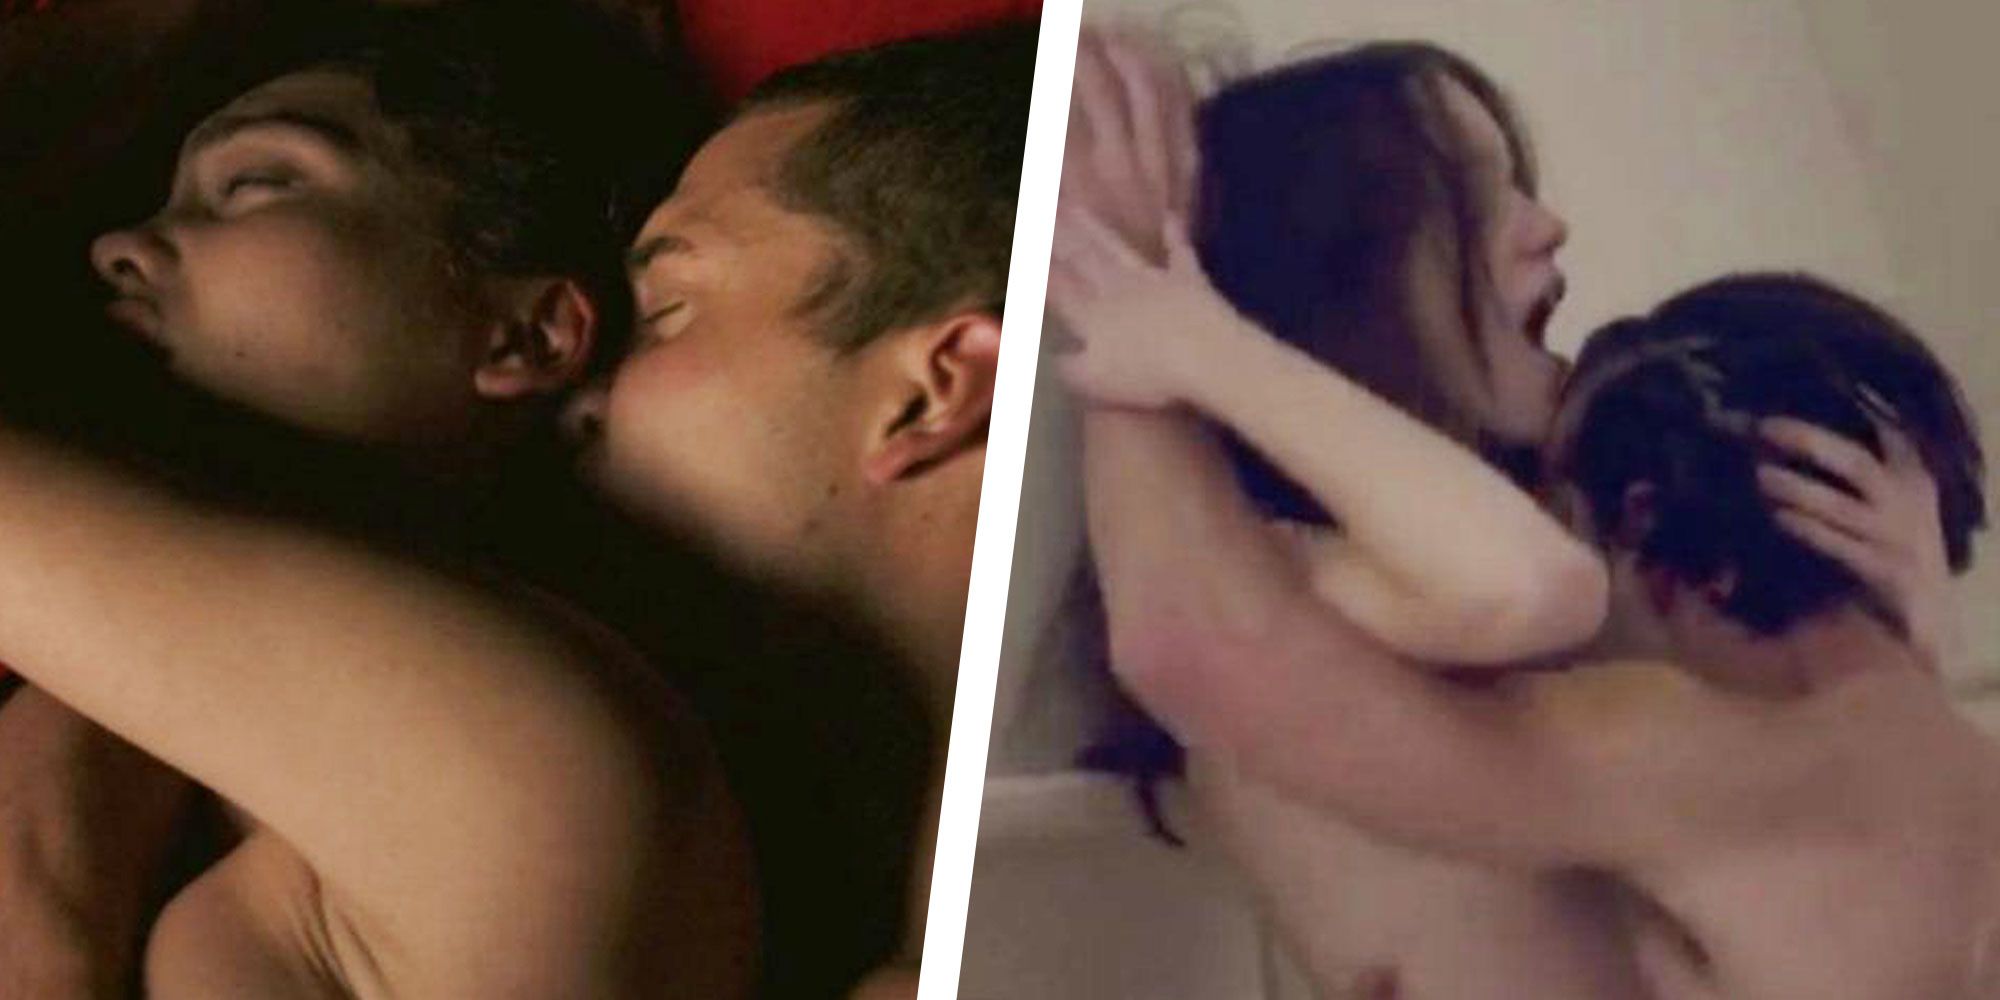 Movies with graphic actual sex scenes